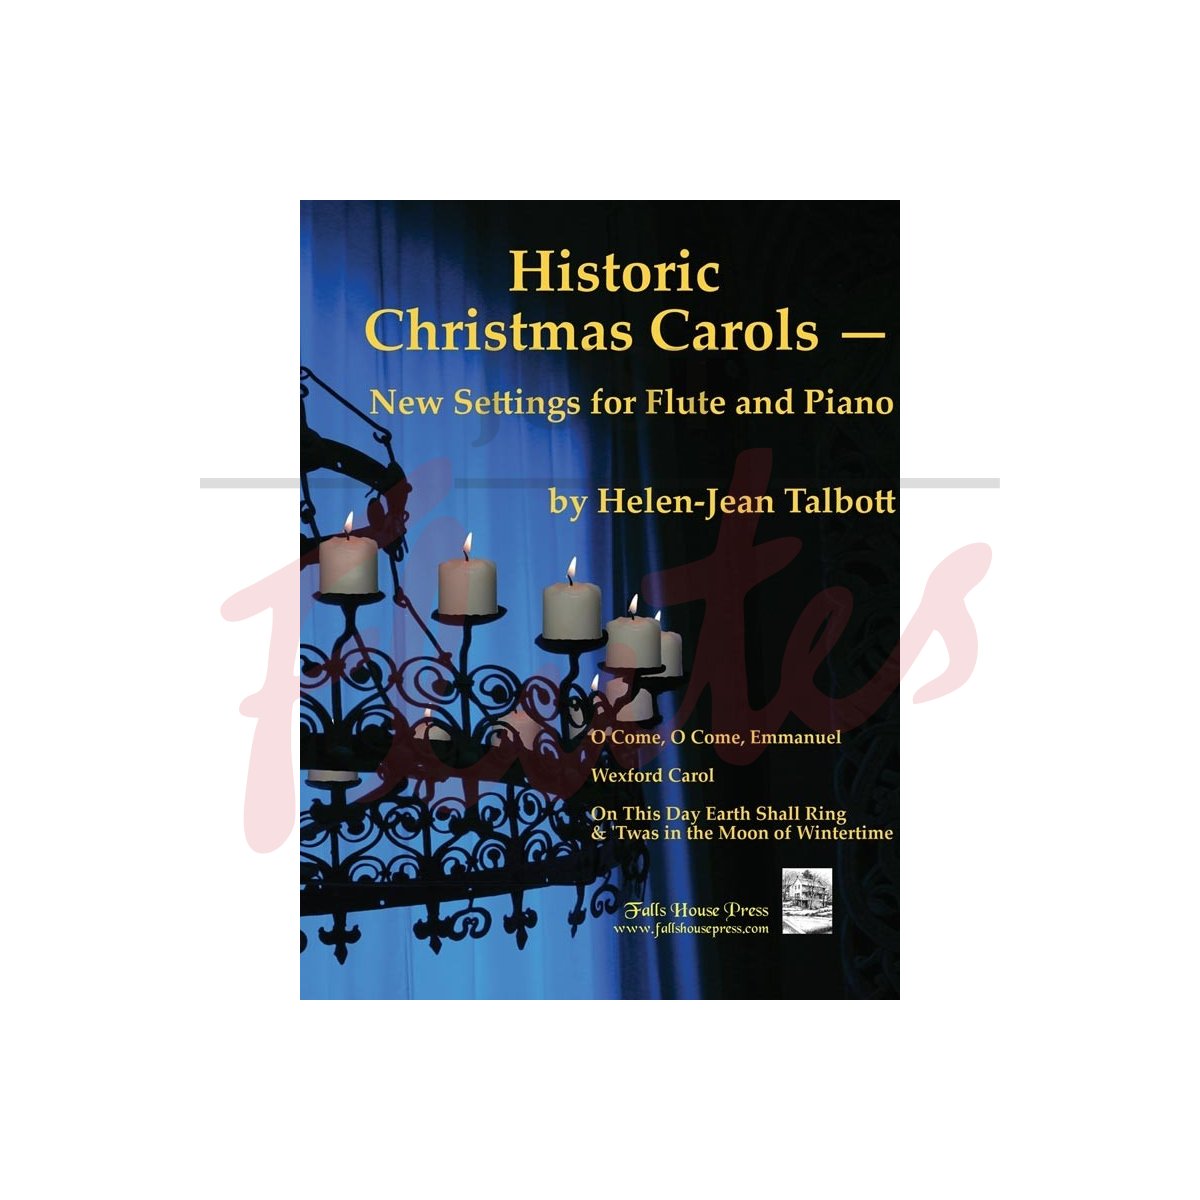 Historic Christmas Carols - New Settings for Flute and Piano